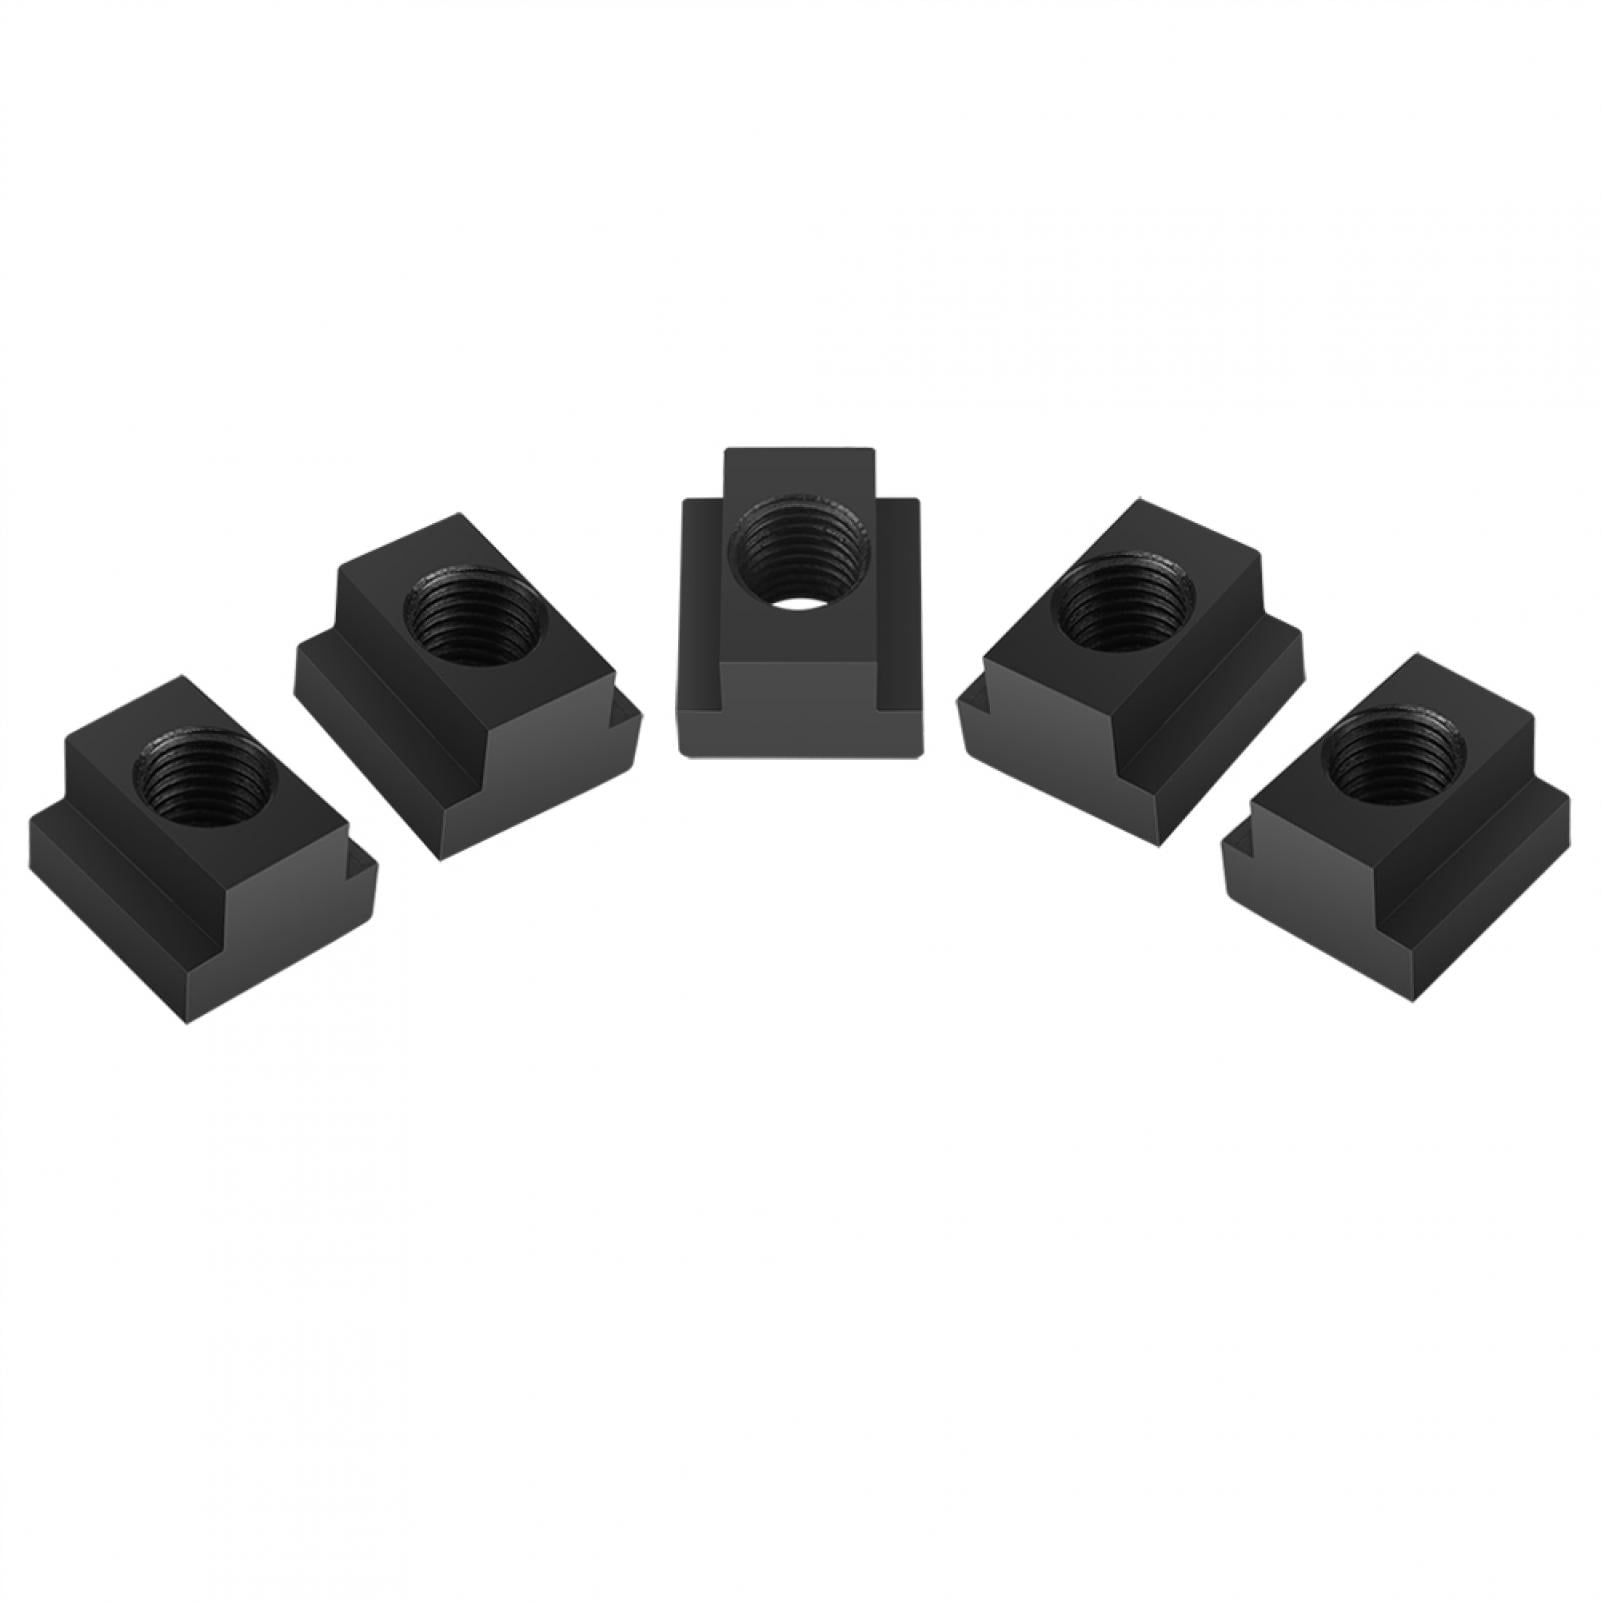 5Pcs x T-NUT Black Oxide T Slot Clamping Nuts Machine Bed Milling 